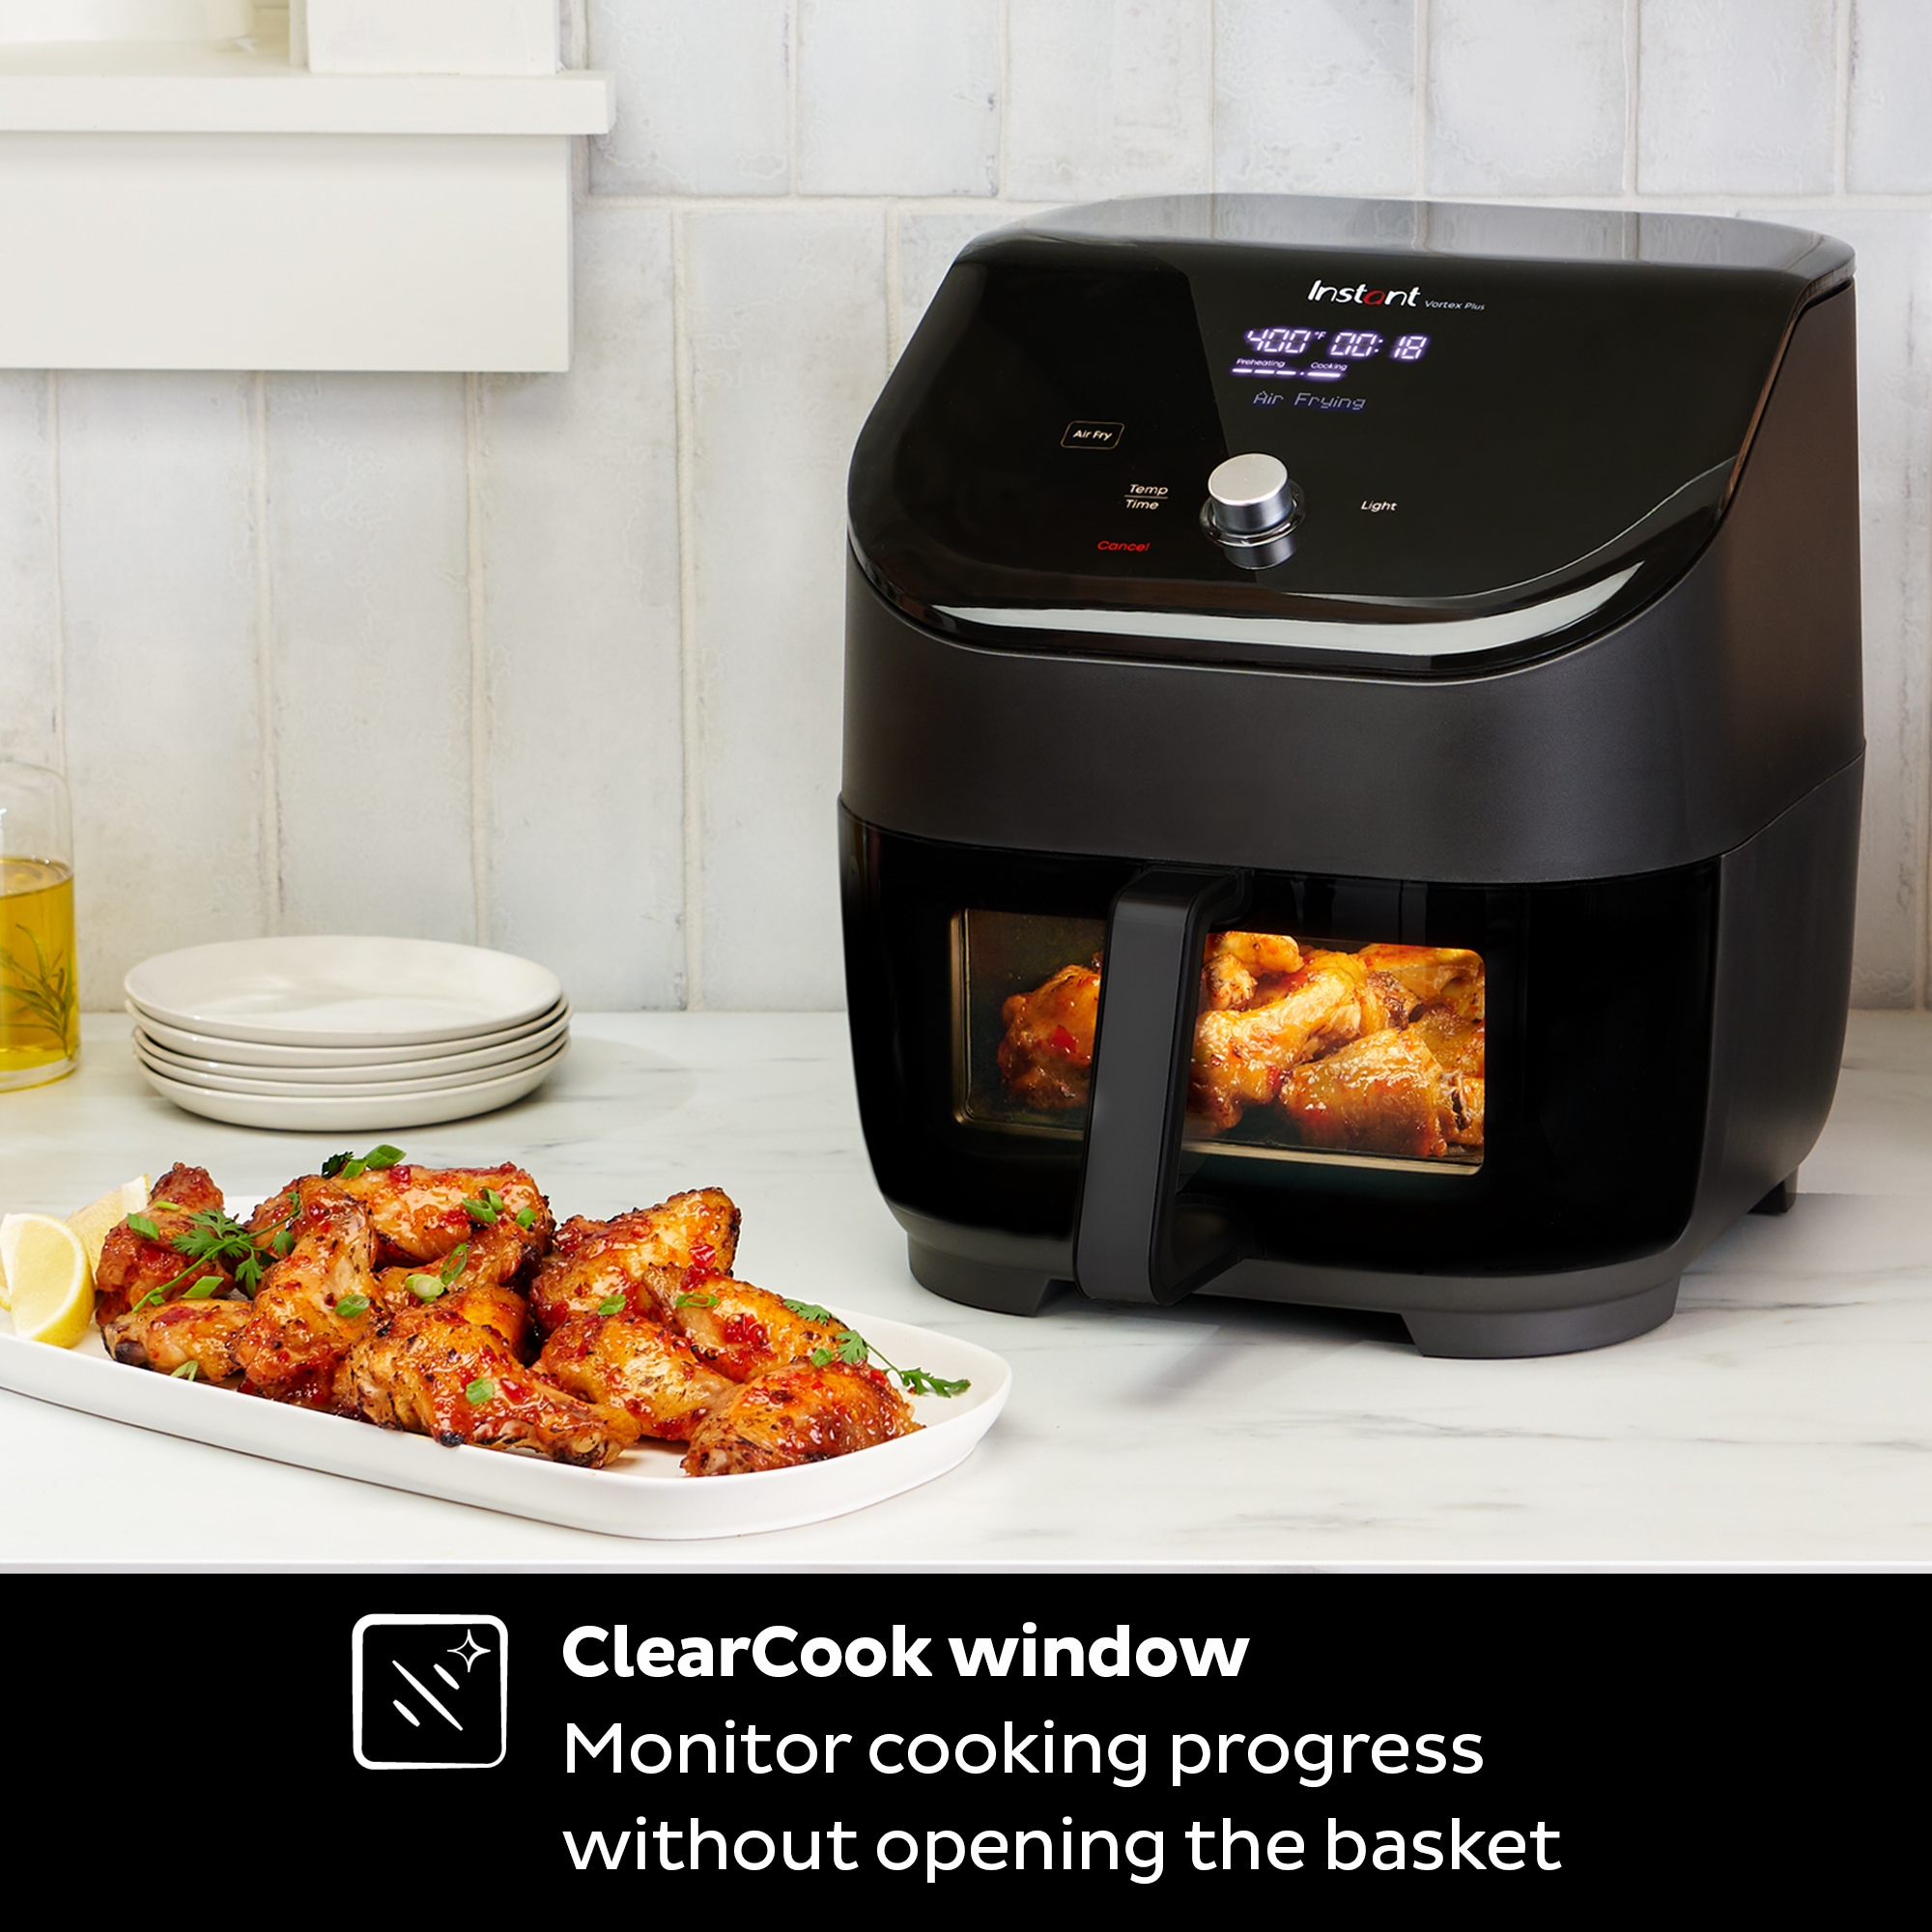 Air Fryer Oven 9 in 1 with Rotisserie, 10 Qt, EvenCrisp Technology